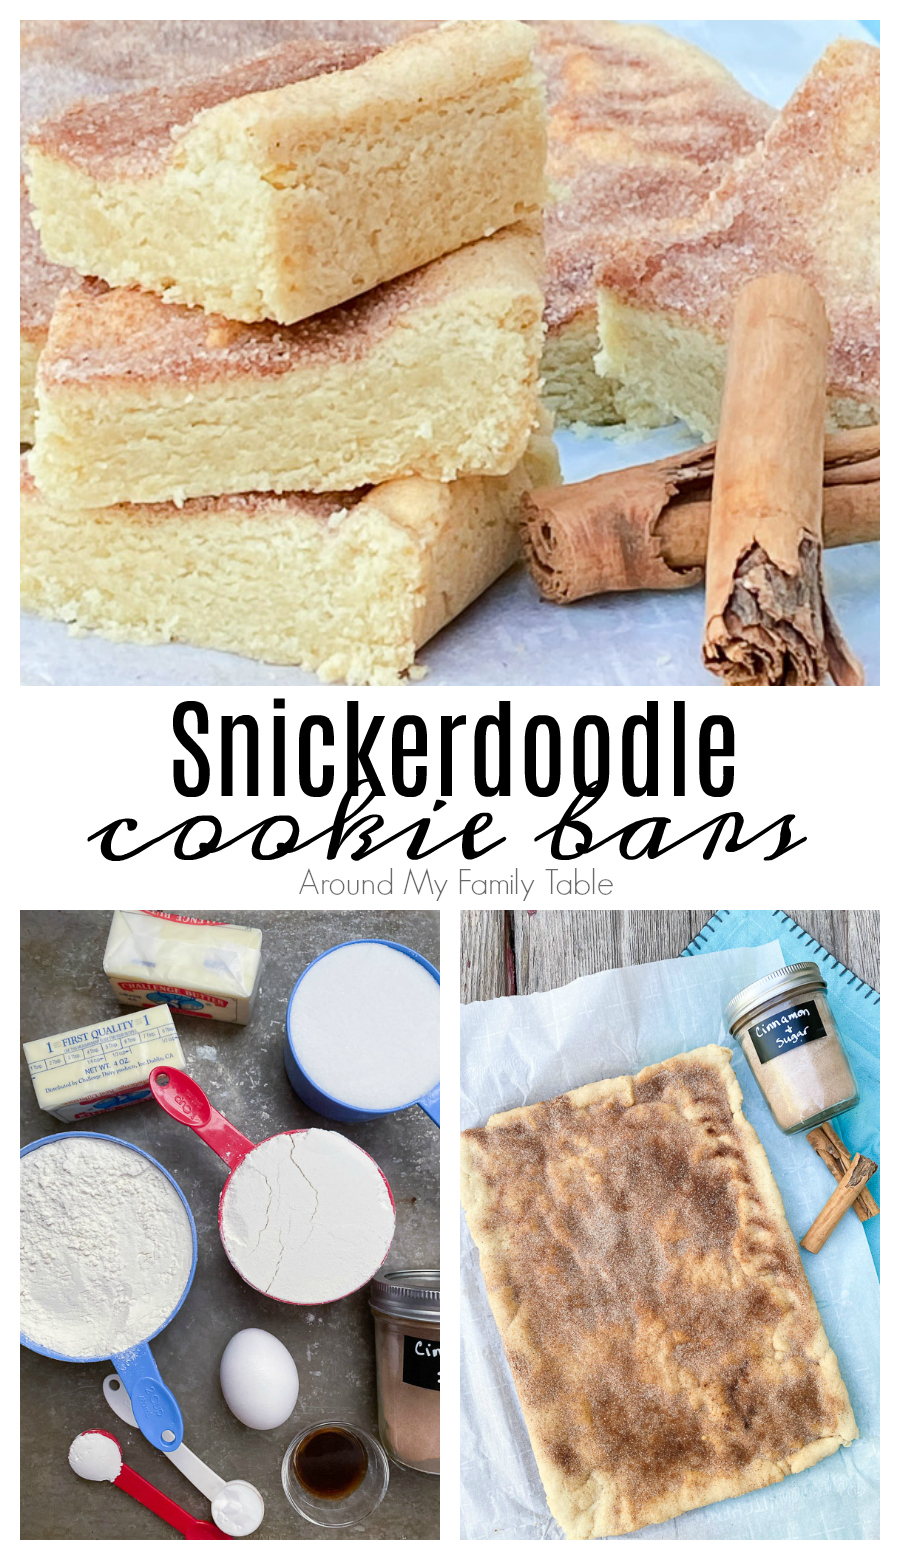 These Snickerdoodle Cookie Bars are the perfect sugar cookies with tons of cinnamon and sugar, but baked in a sheet pan and served up as a bar instead cookie. via @slingmama